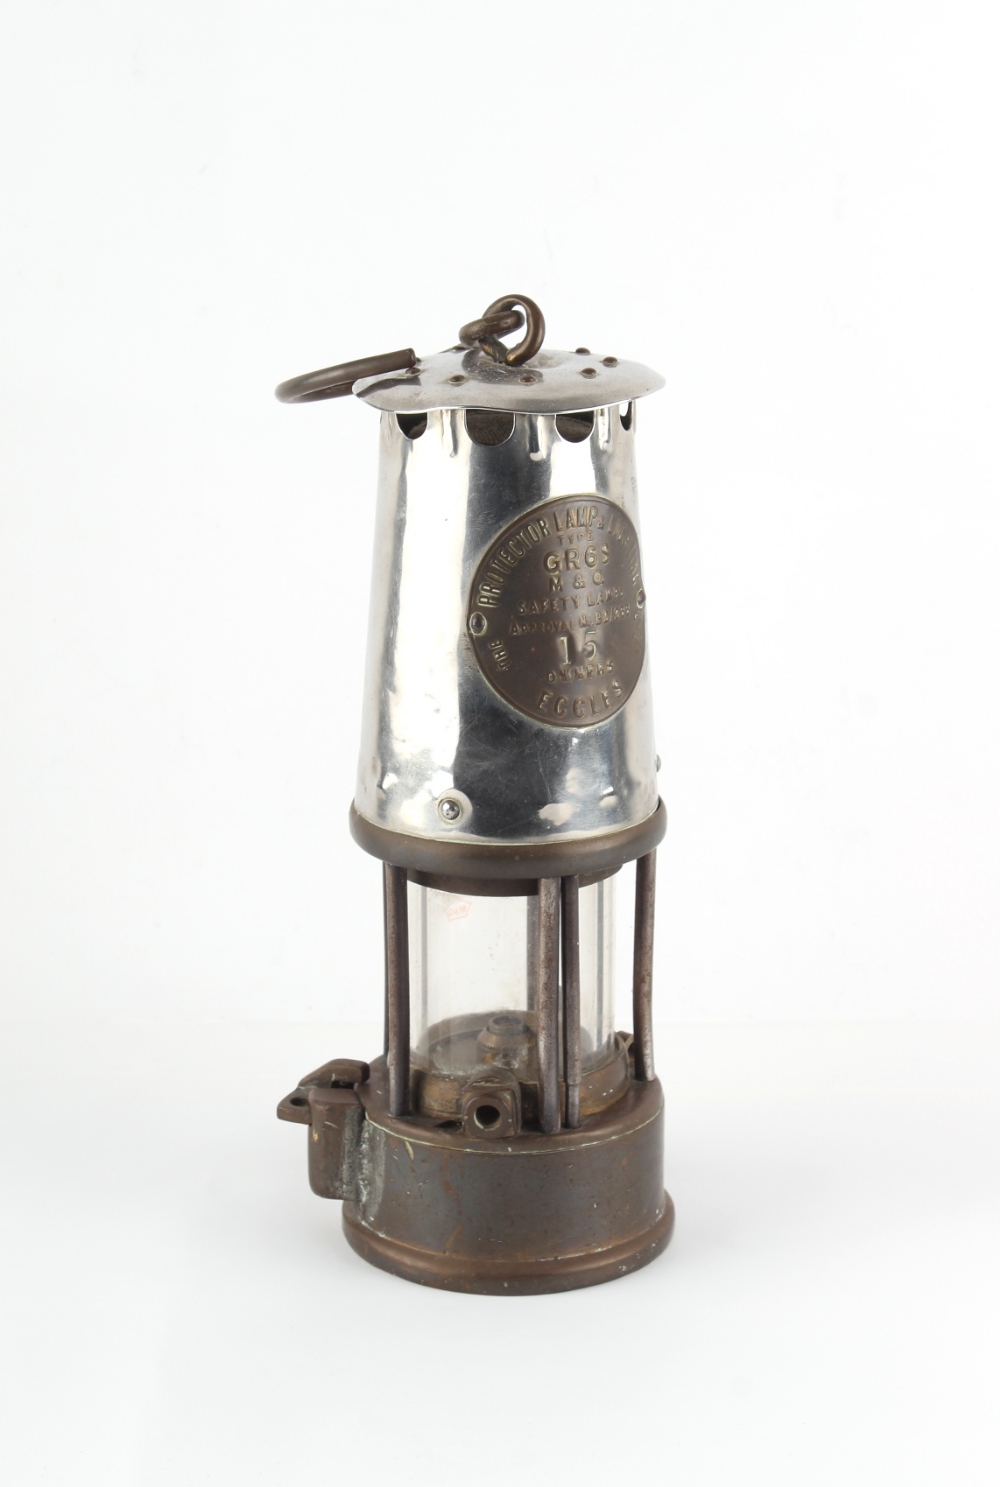 Property of a lady - a miner's lamp, Type GR 6S, by The Protector Lamp & Lighting Co. Ltd., Eccles.